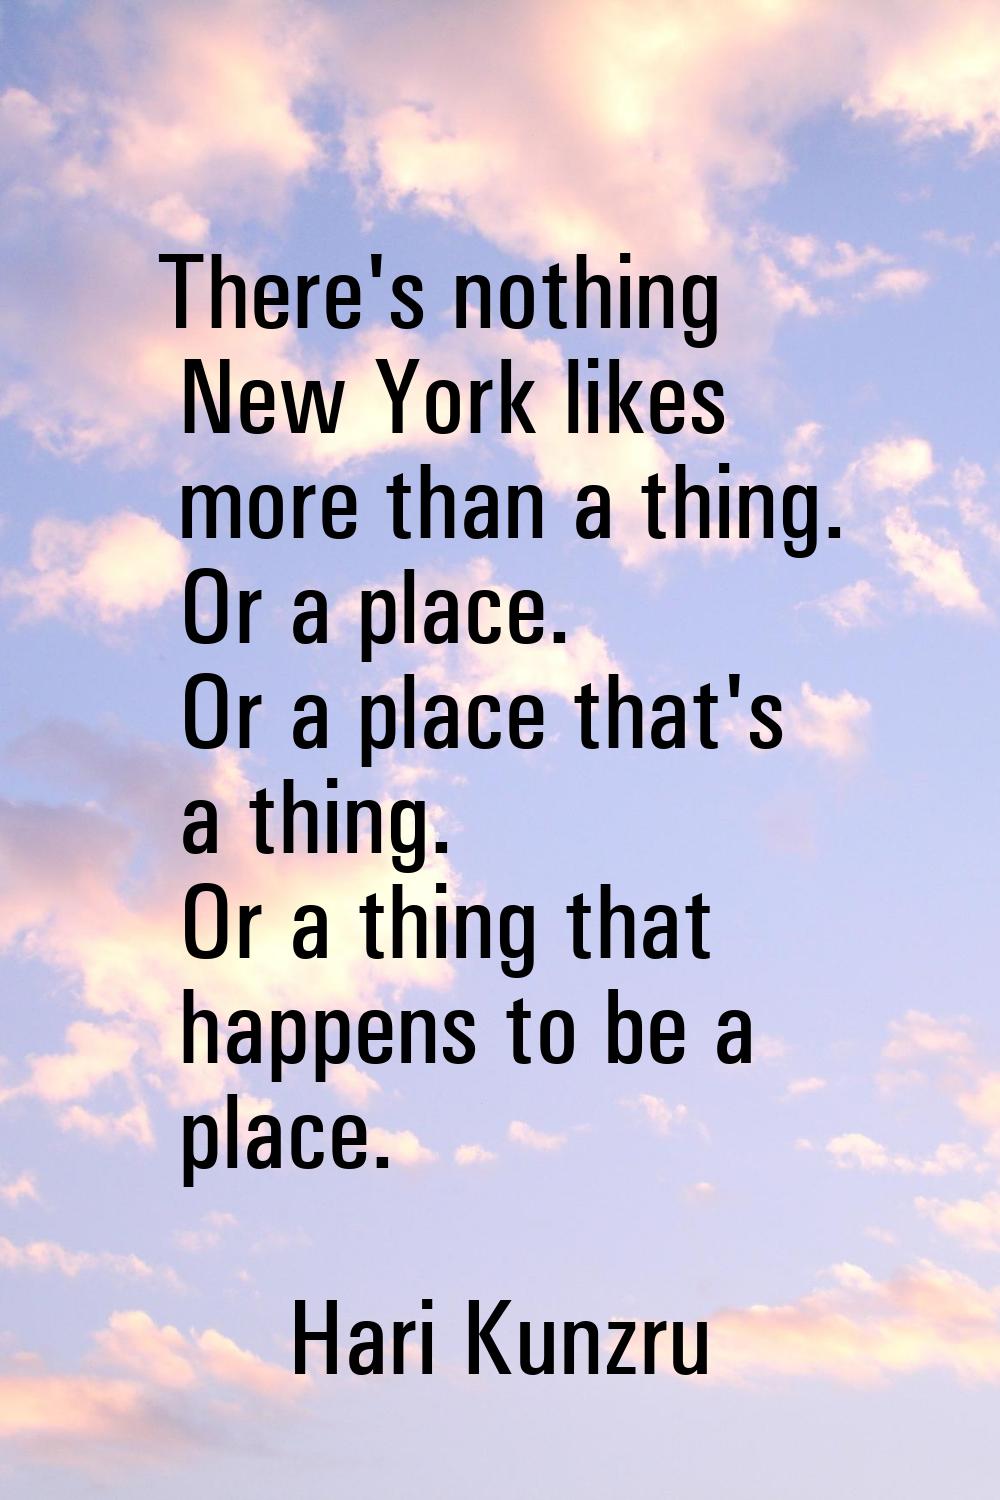 There's nothing New York likes more than a thing. Or a place. Or a place that's a thing. Or a thing